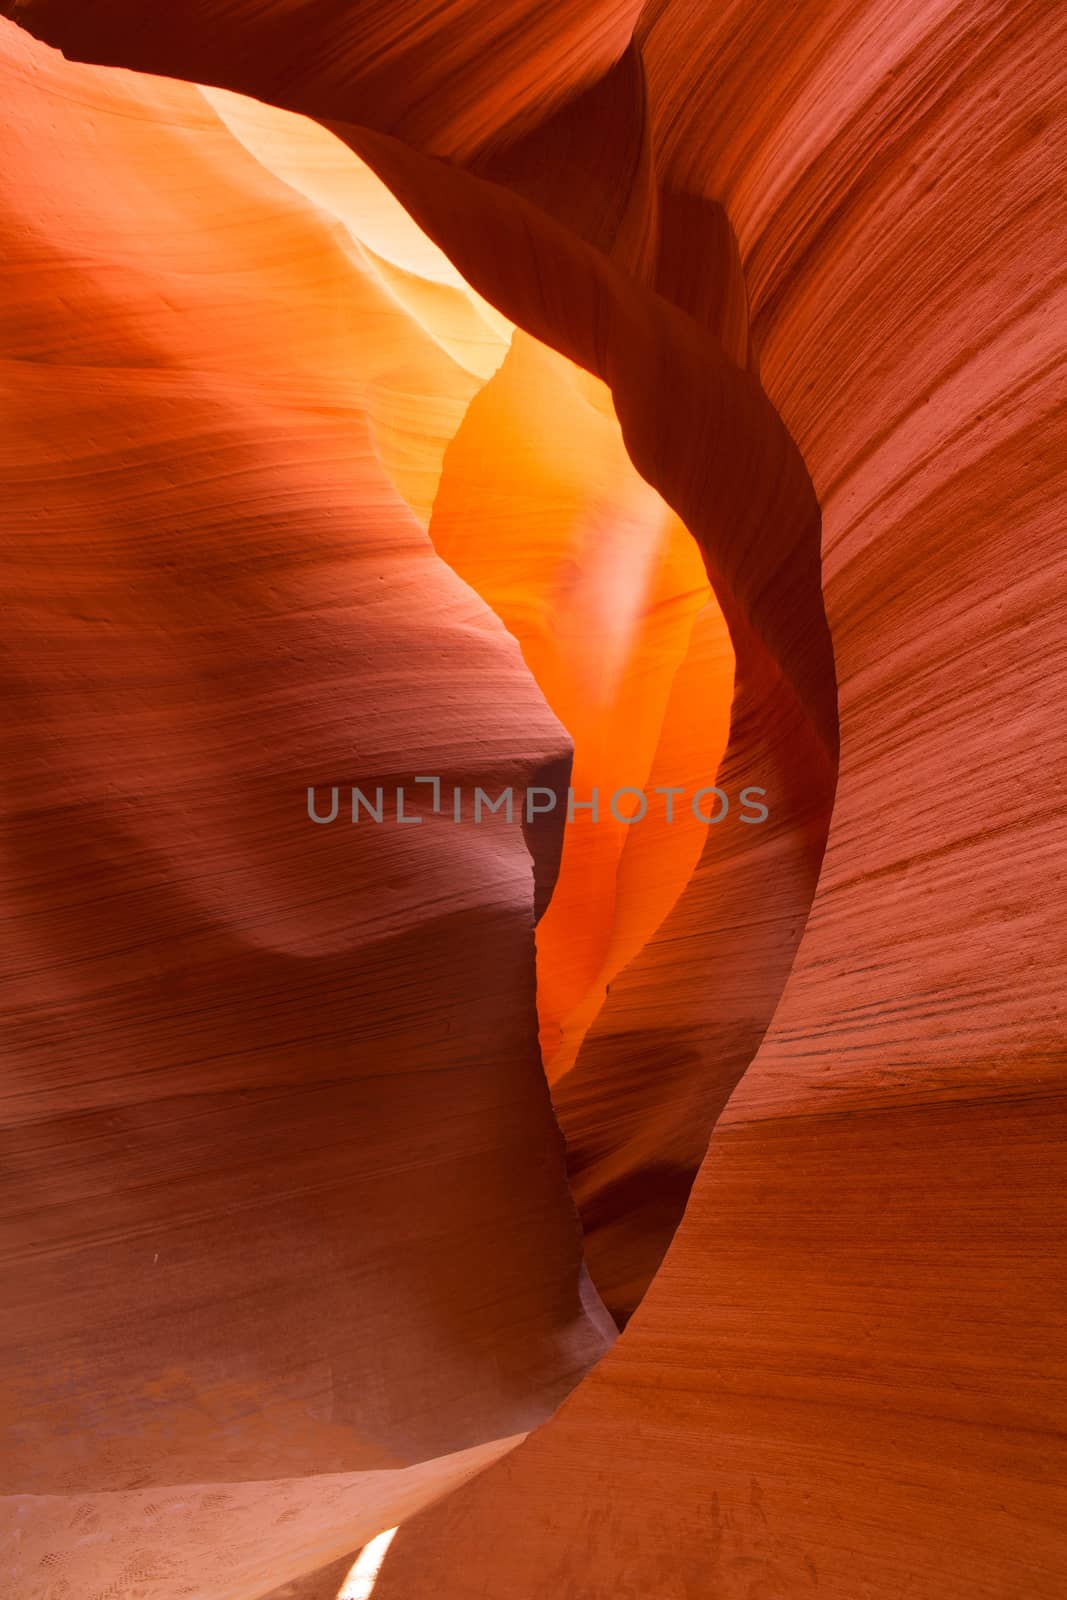 Sandstone waves and colors inside iconic Antelope Canyon by CaptureLight